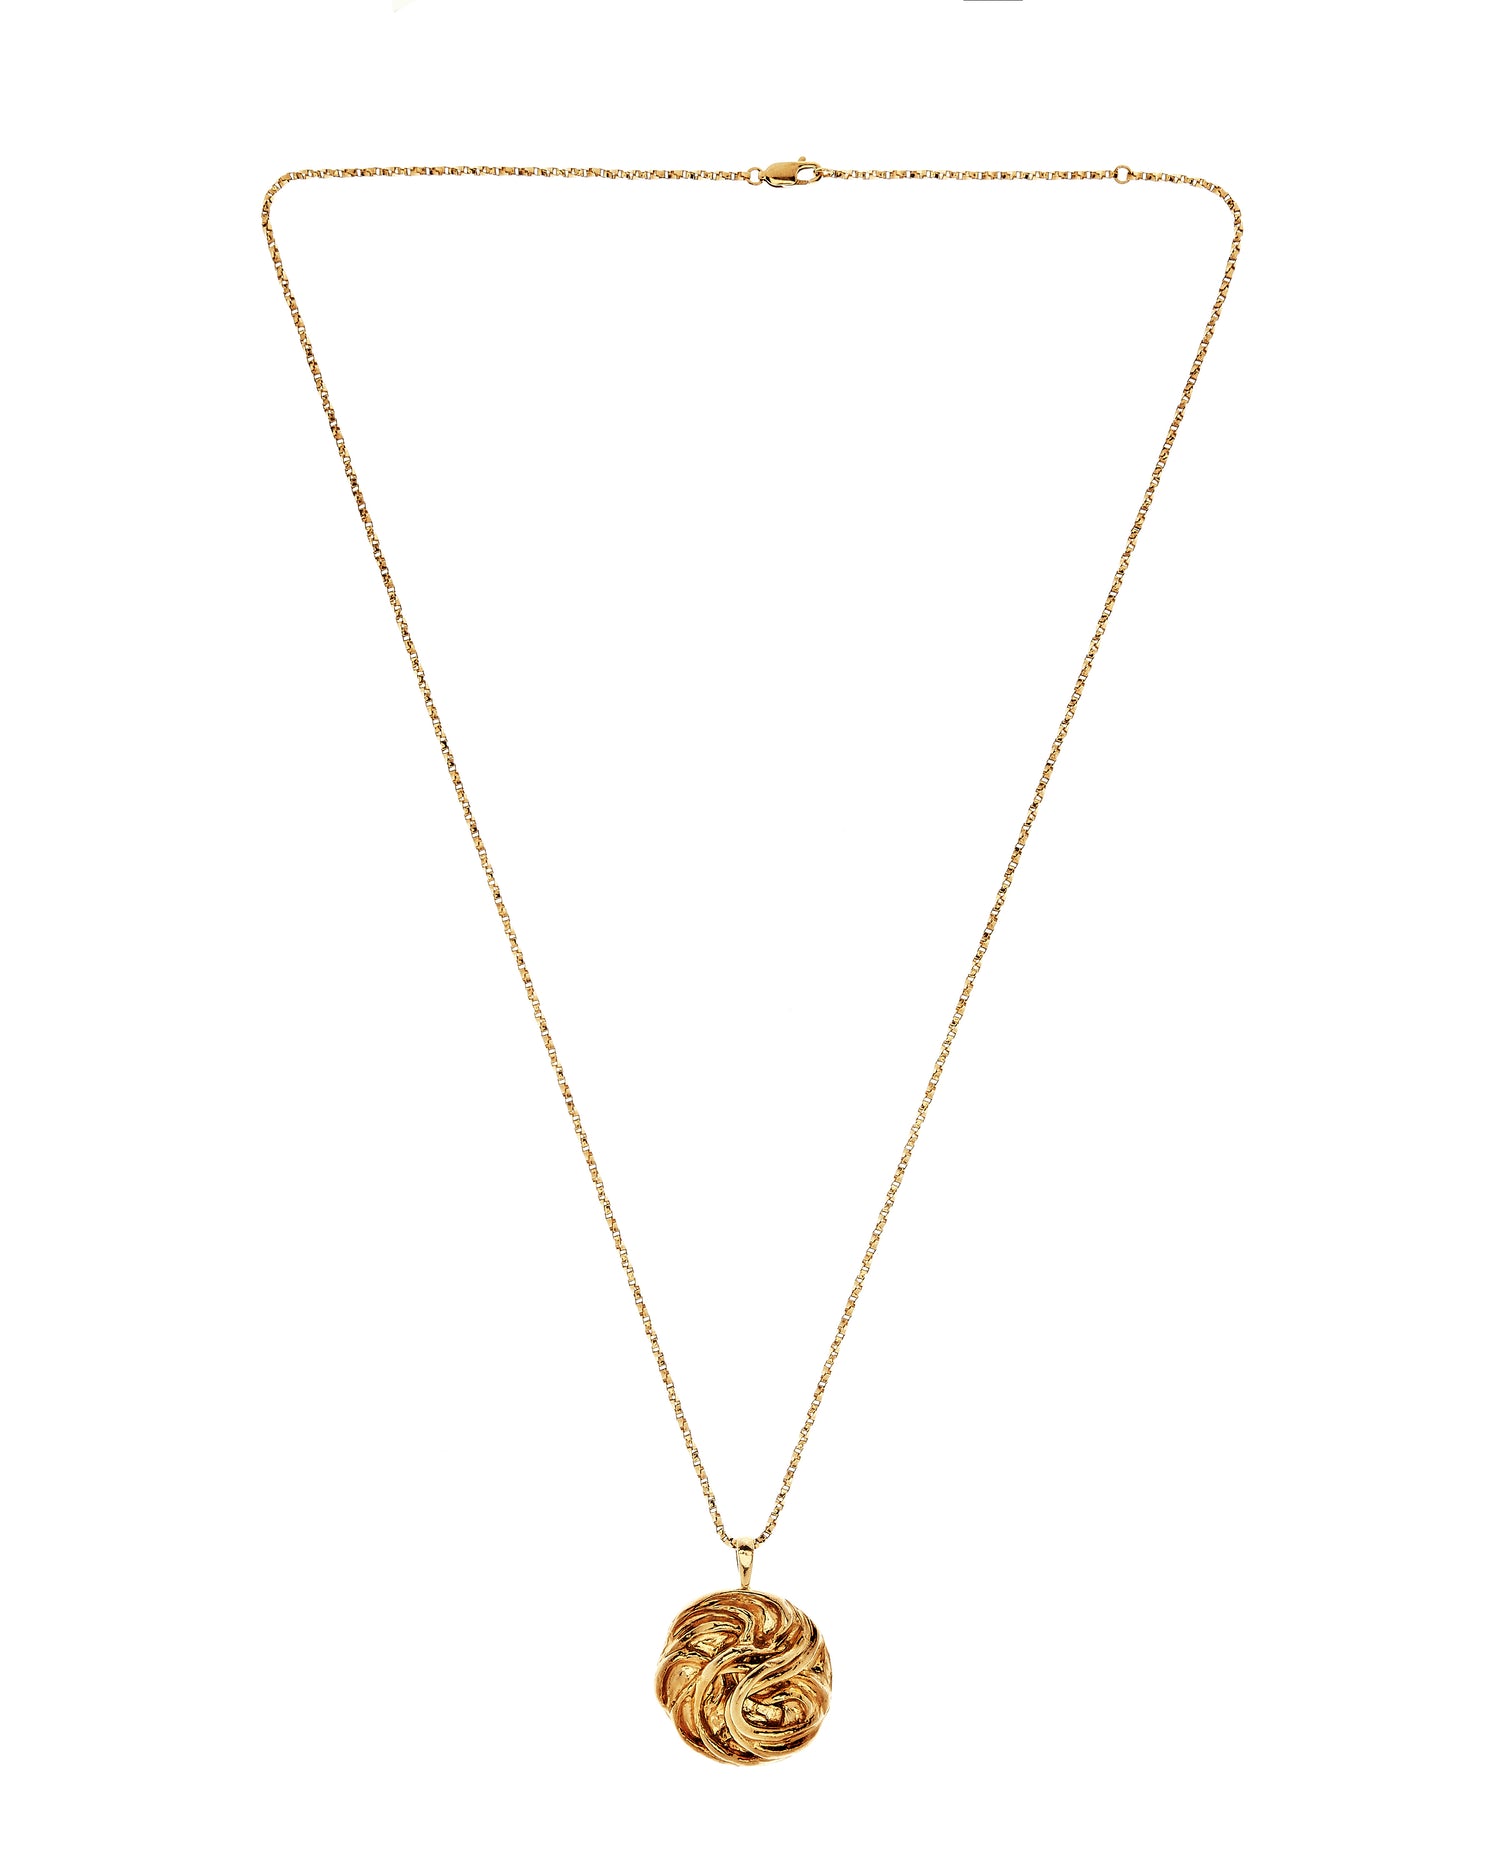 Full wide shot of gold vermeil necklace with spiral detail and lobster clasp chain